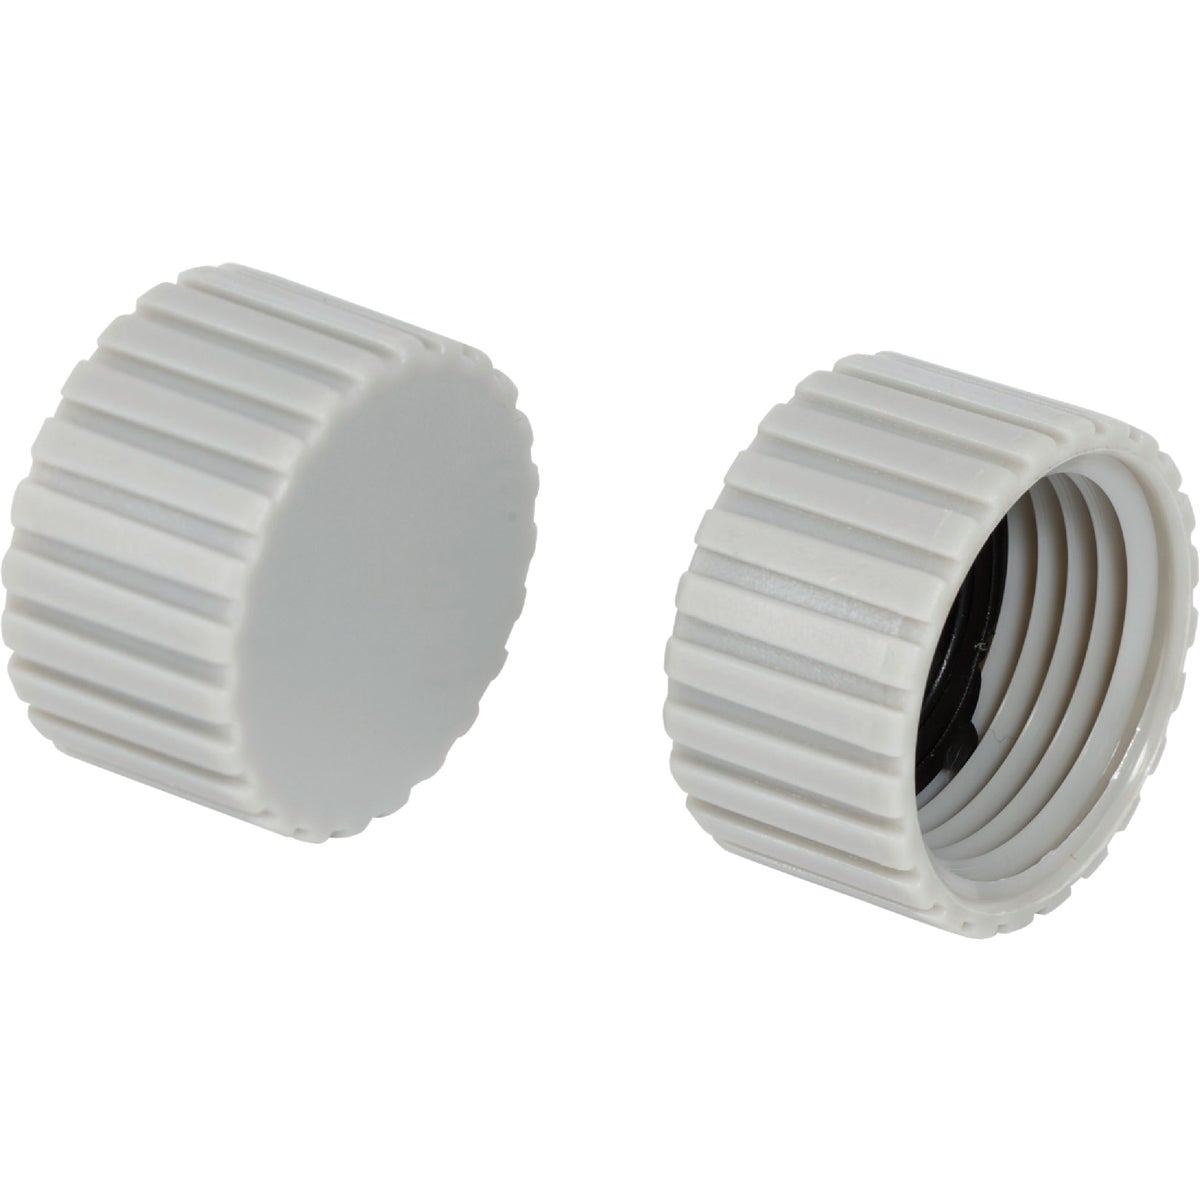 Item 715328, For use with any standard male hose end (5/8 In.). Durable construction.